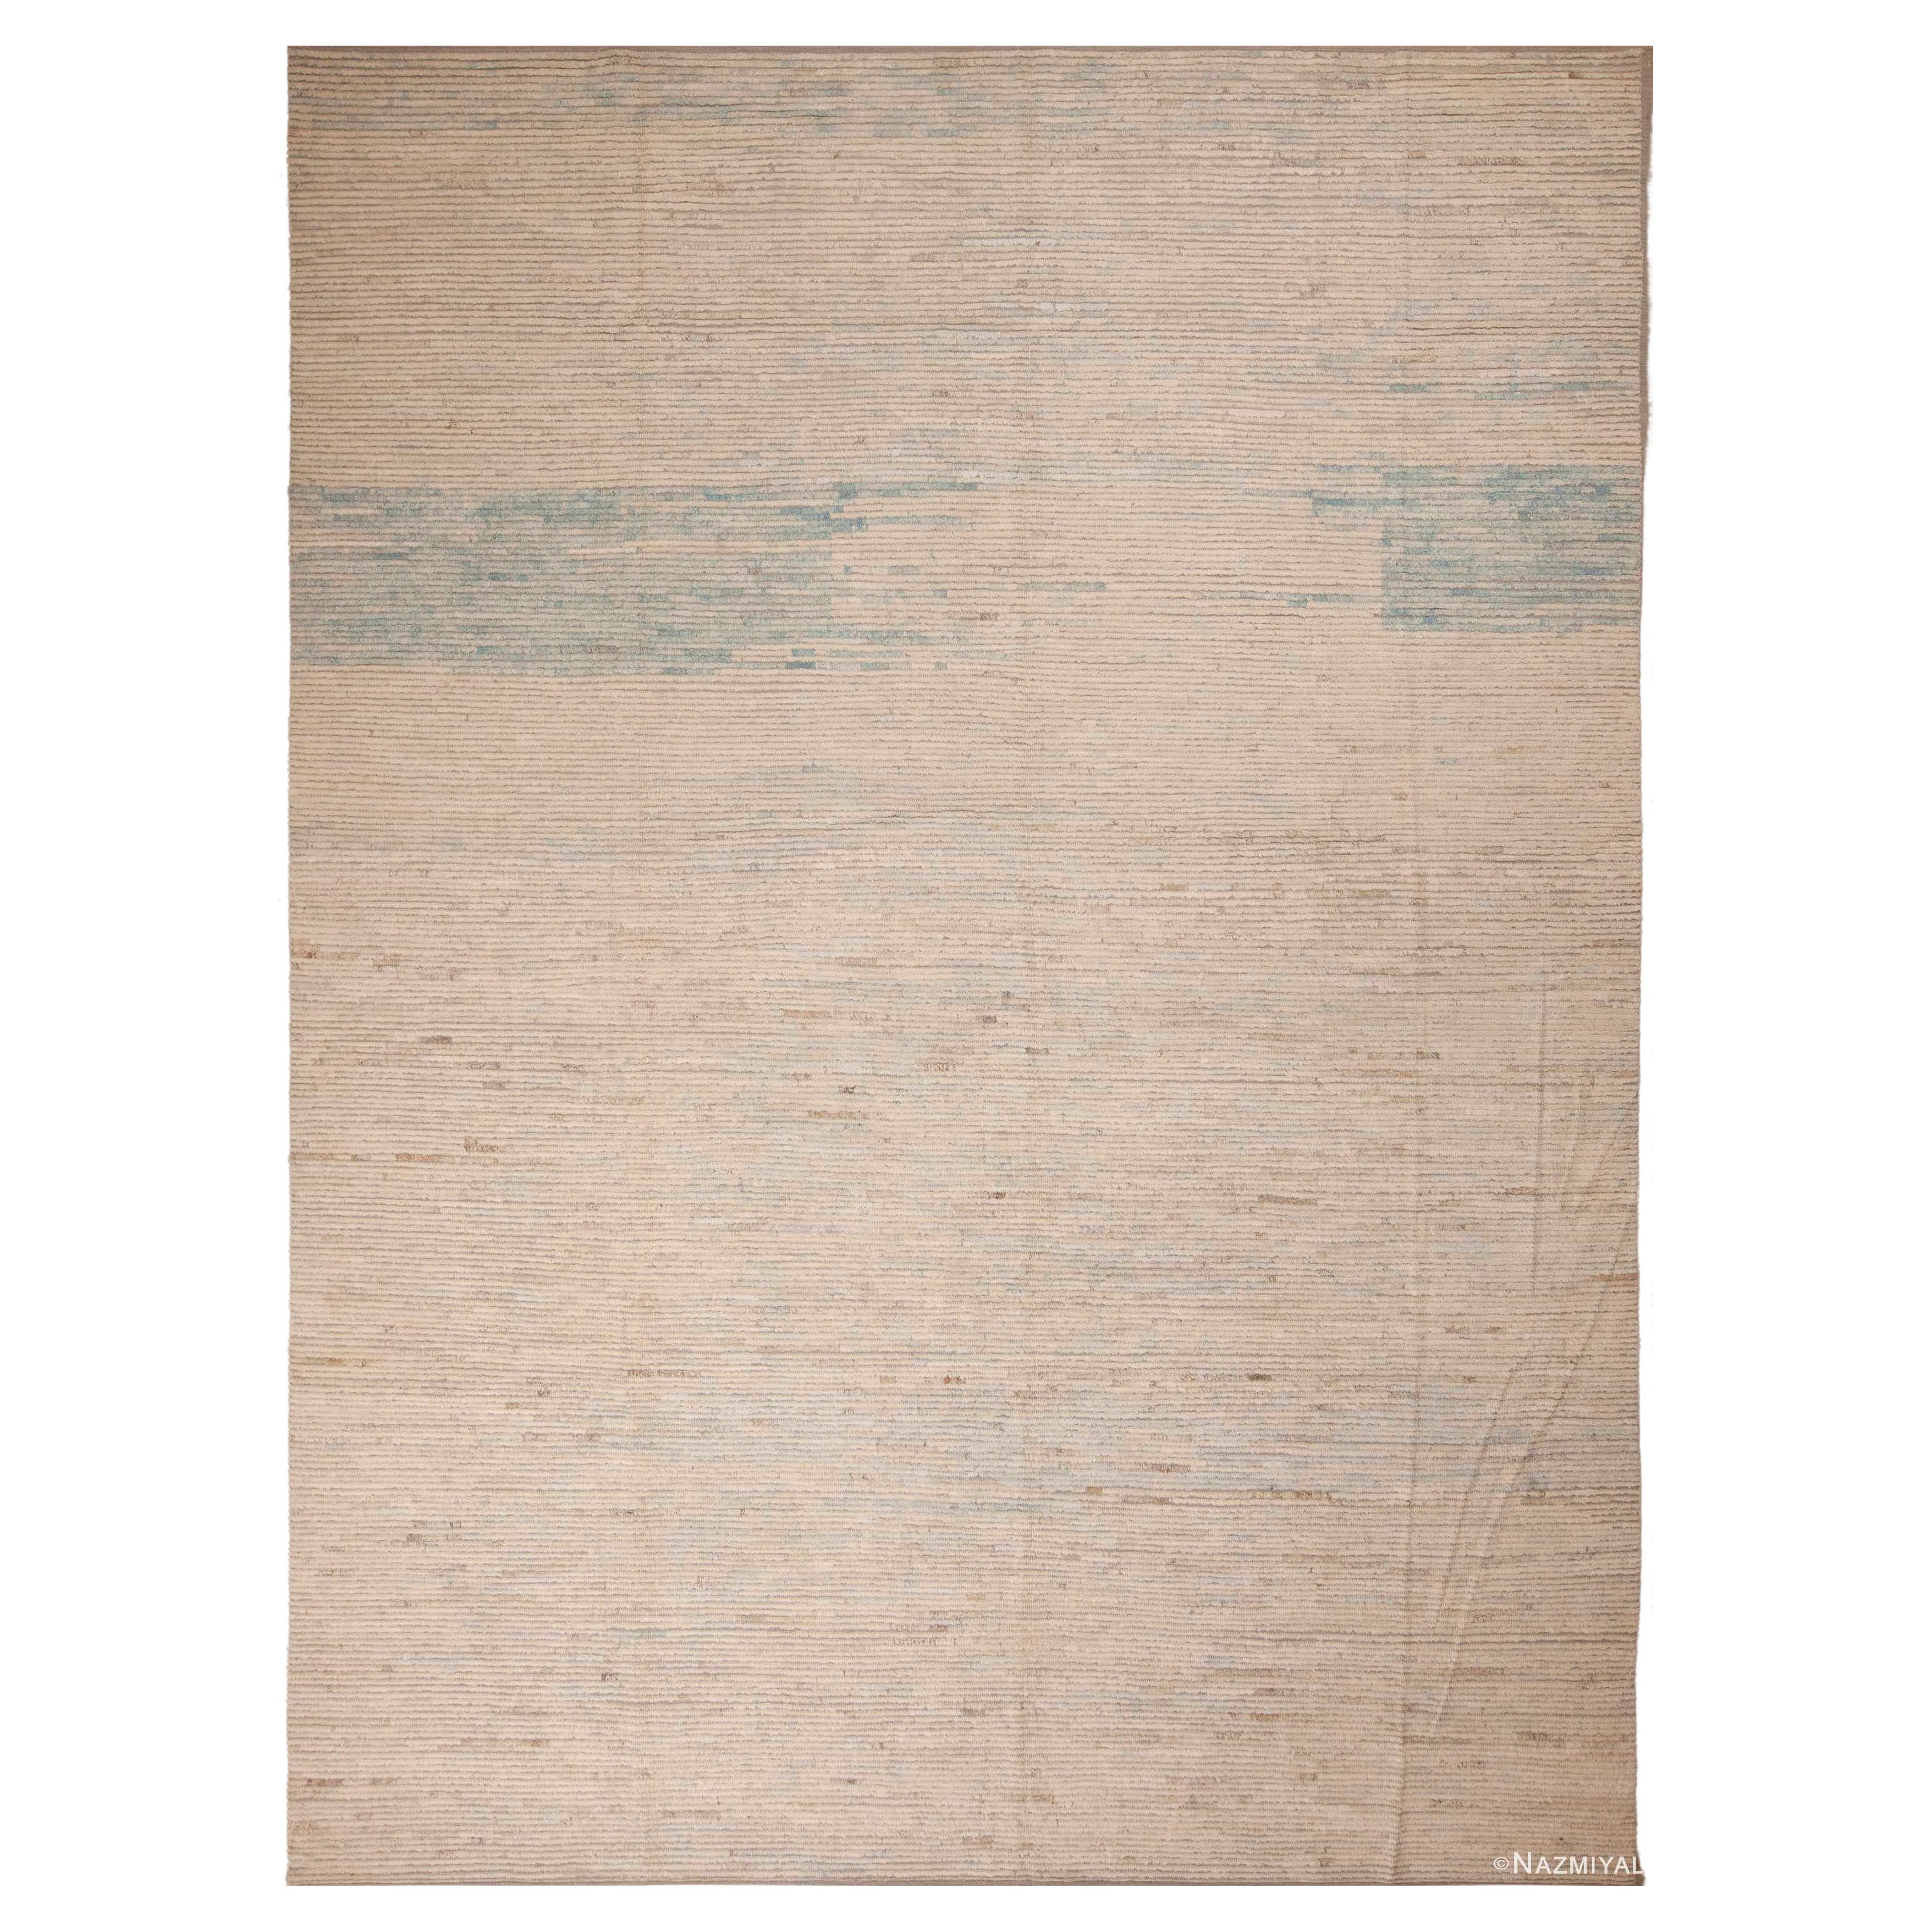 Nazmiyal Collection Abstract Ivory Cream Background Modern Rug 10'5" x 13'10"